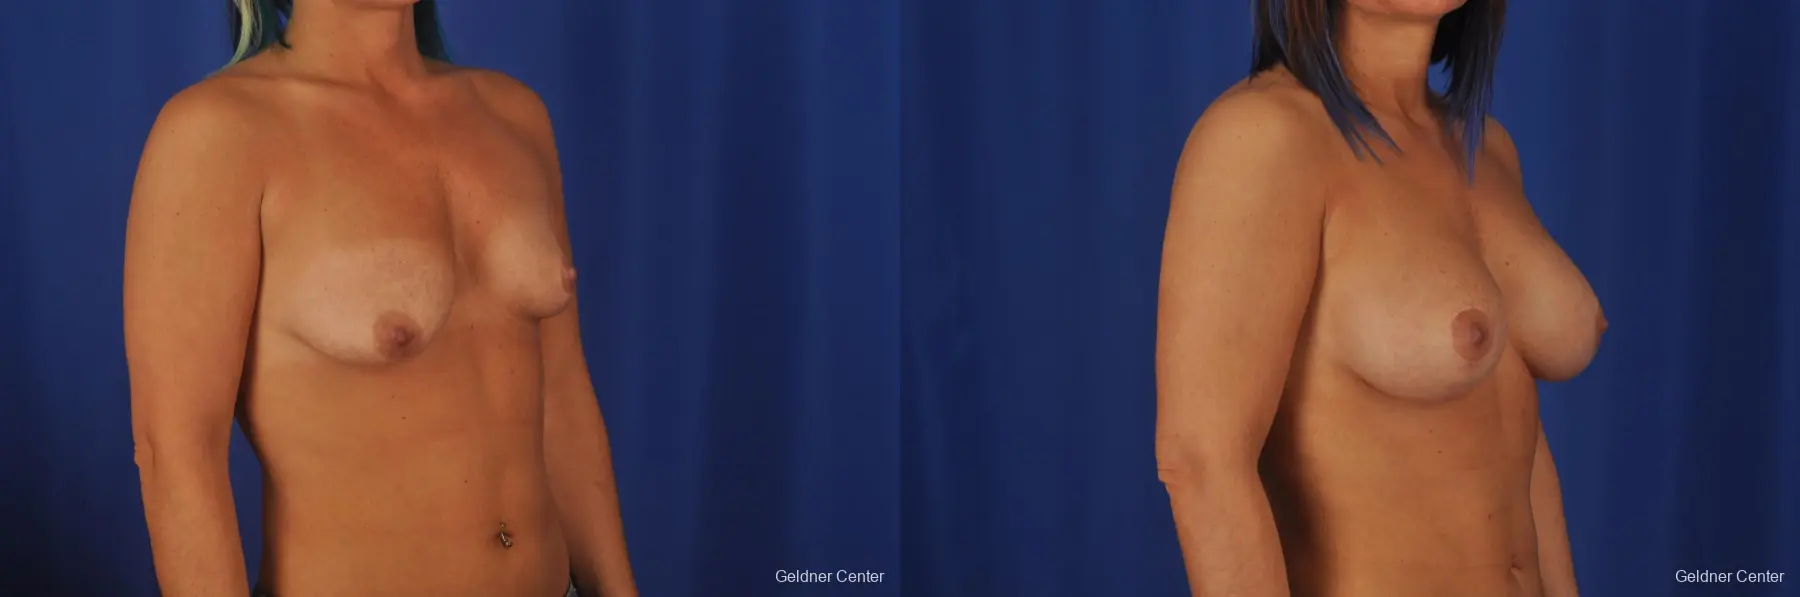 Breast Lift Lake Shore Dr, Chicago 2337 - Before and After 3